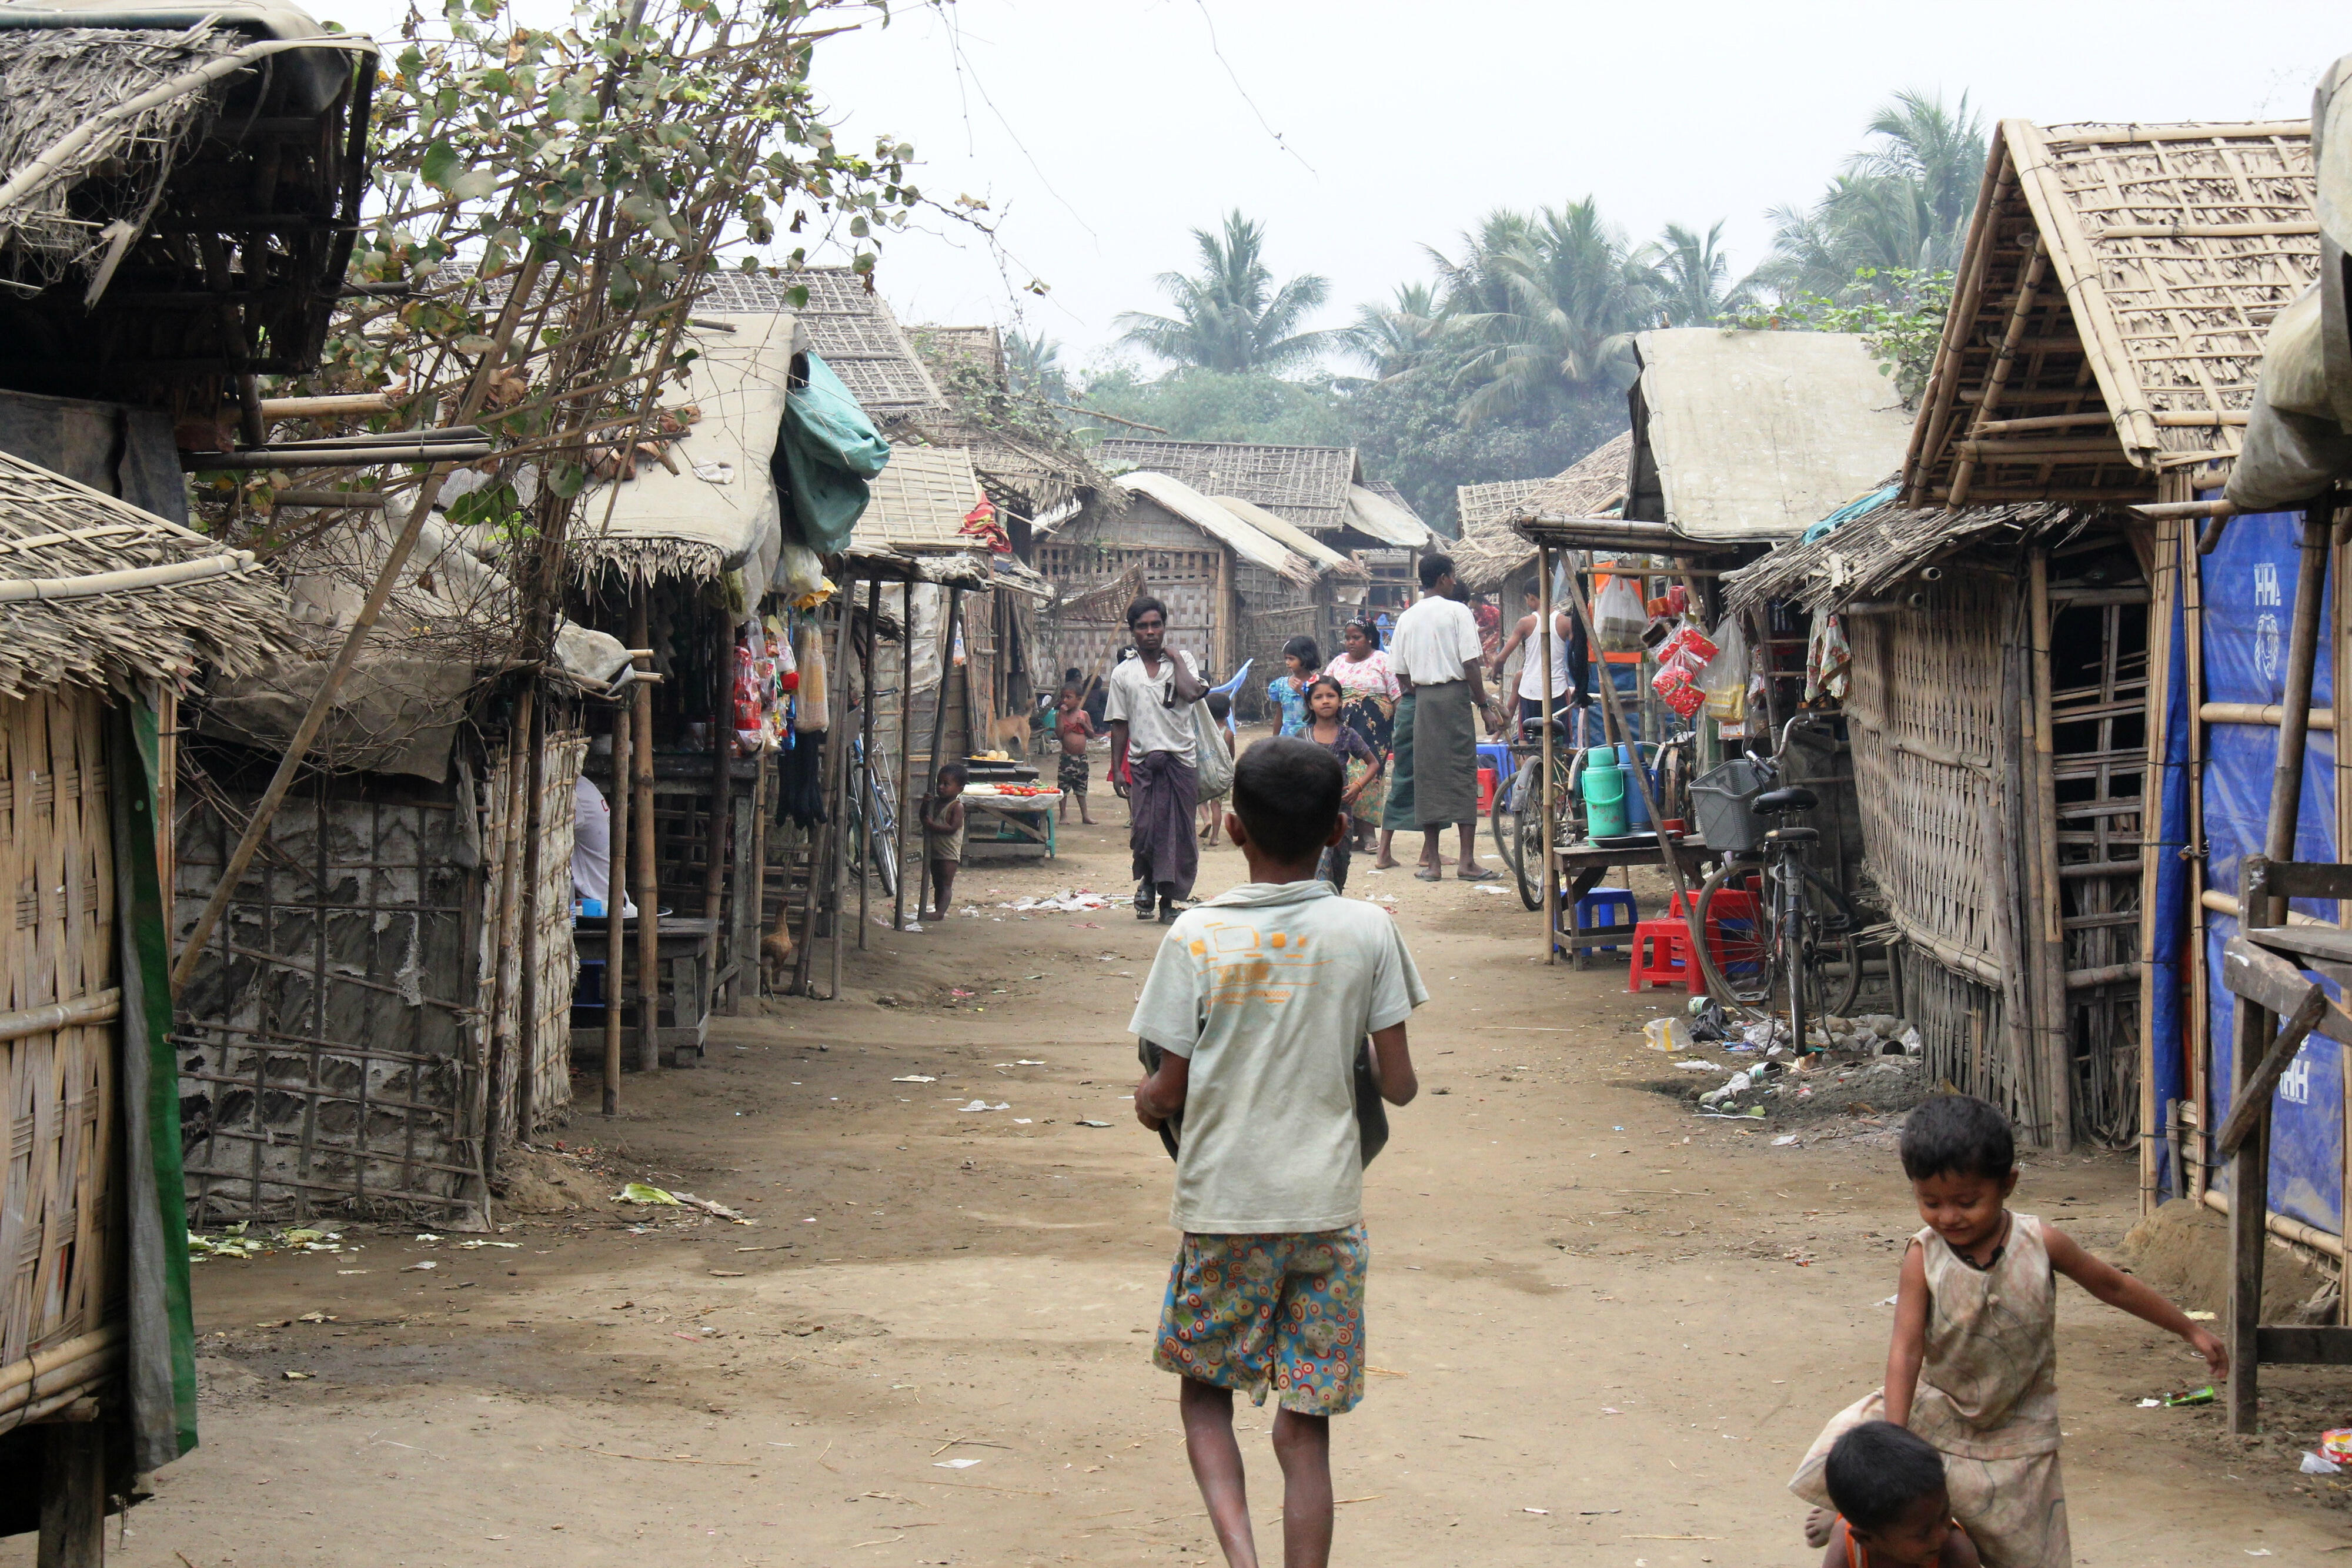 A boy walks through the streets of a crowded camp near Sittwe in Myanmar's Rakhine state.